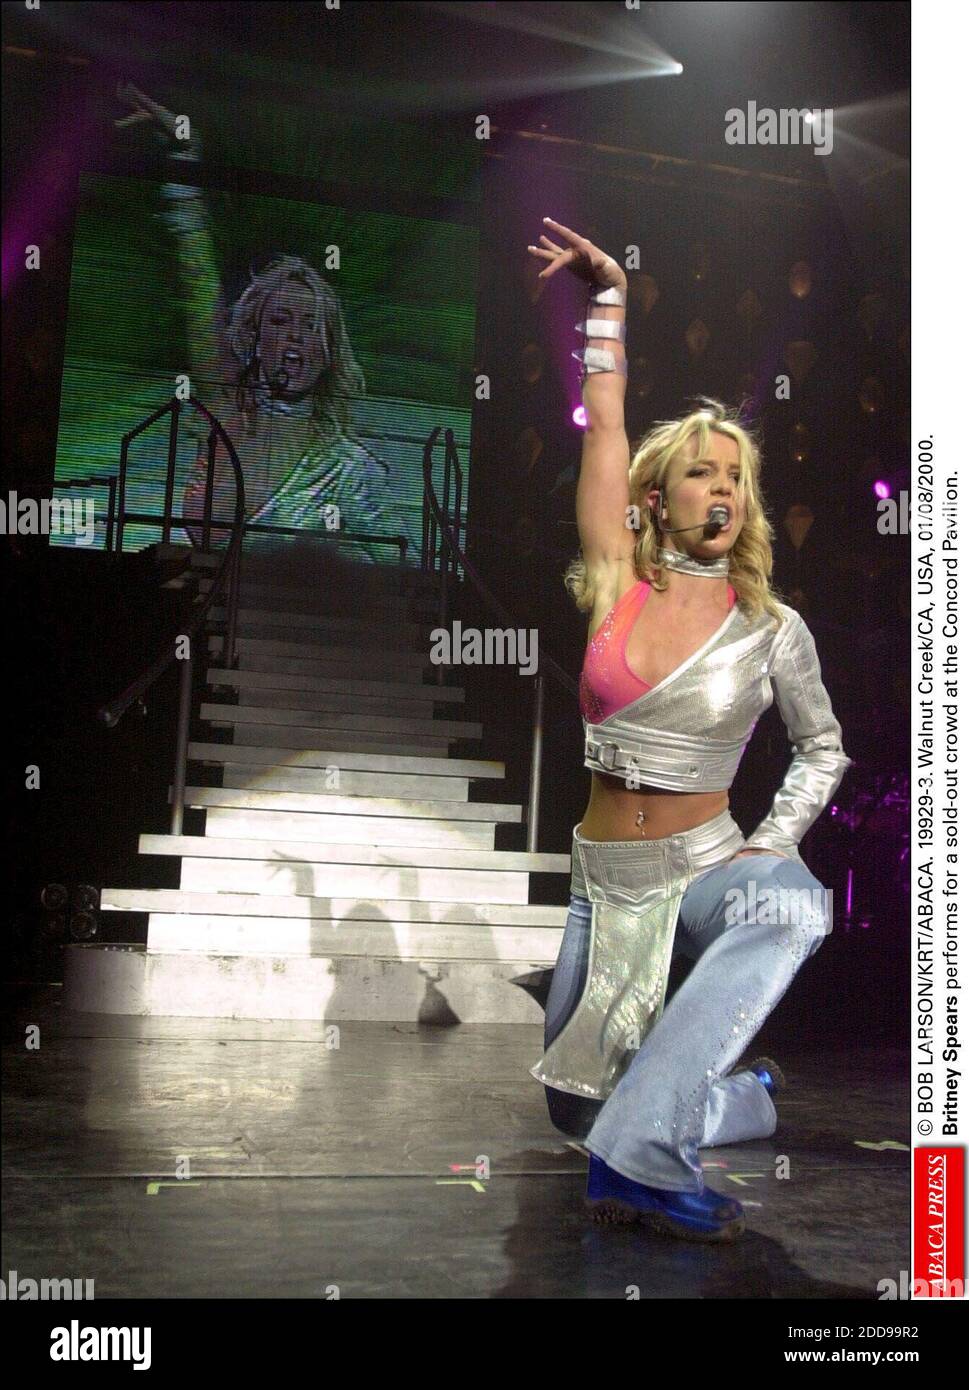 NO FILM, NO VIDEO, NO TV, NO DOCUMENTARY - © BOB LARSON/KRT/ABACA. 19929-3. Walnut Creek/CA, USA, 01/08/2000. Britney Spears performs for a sold-out crowd at the Concord Pavilion. Stock Photo